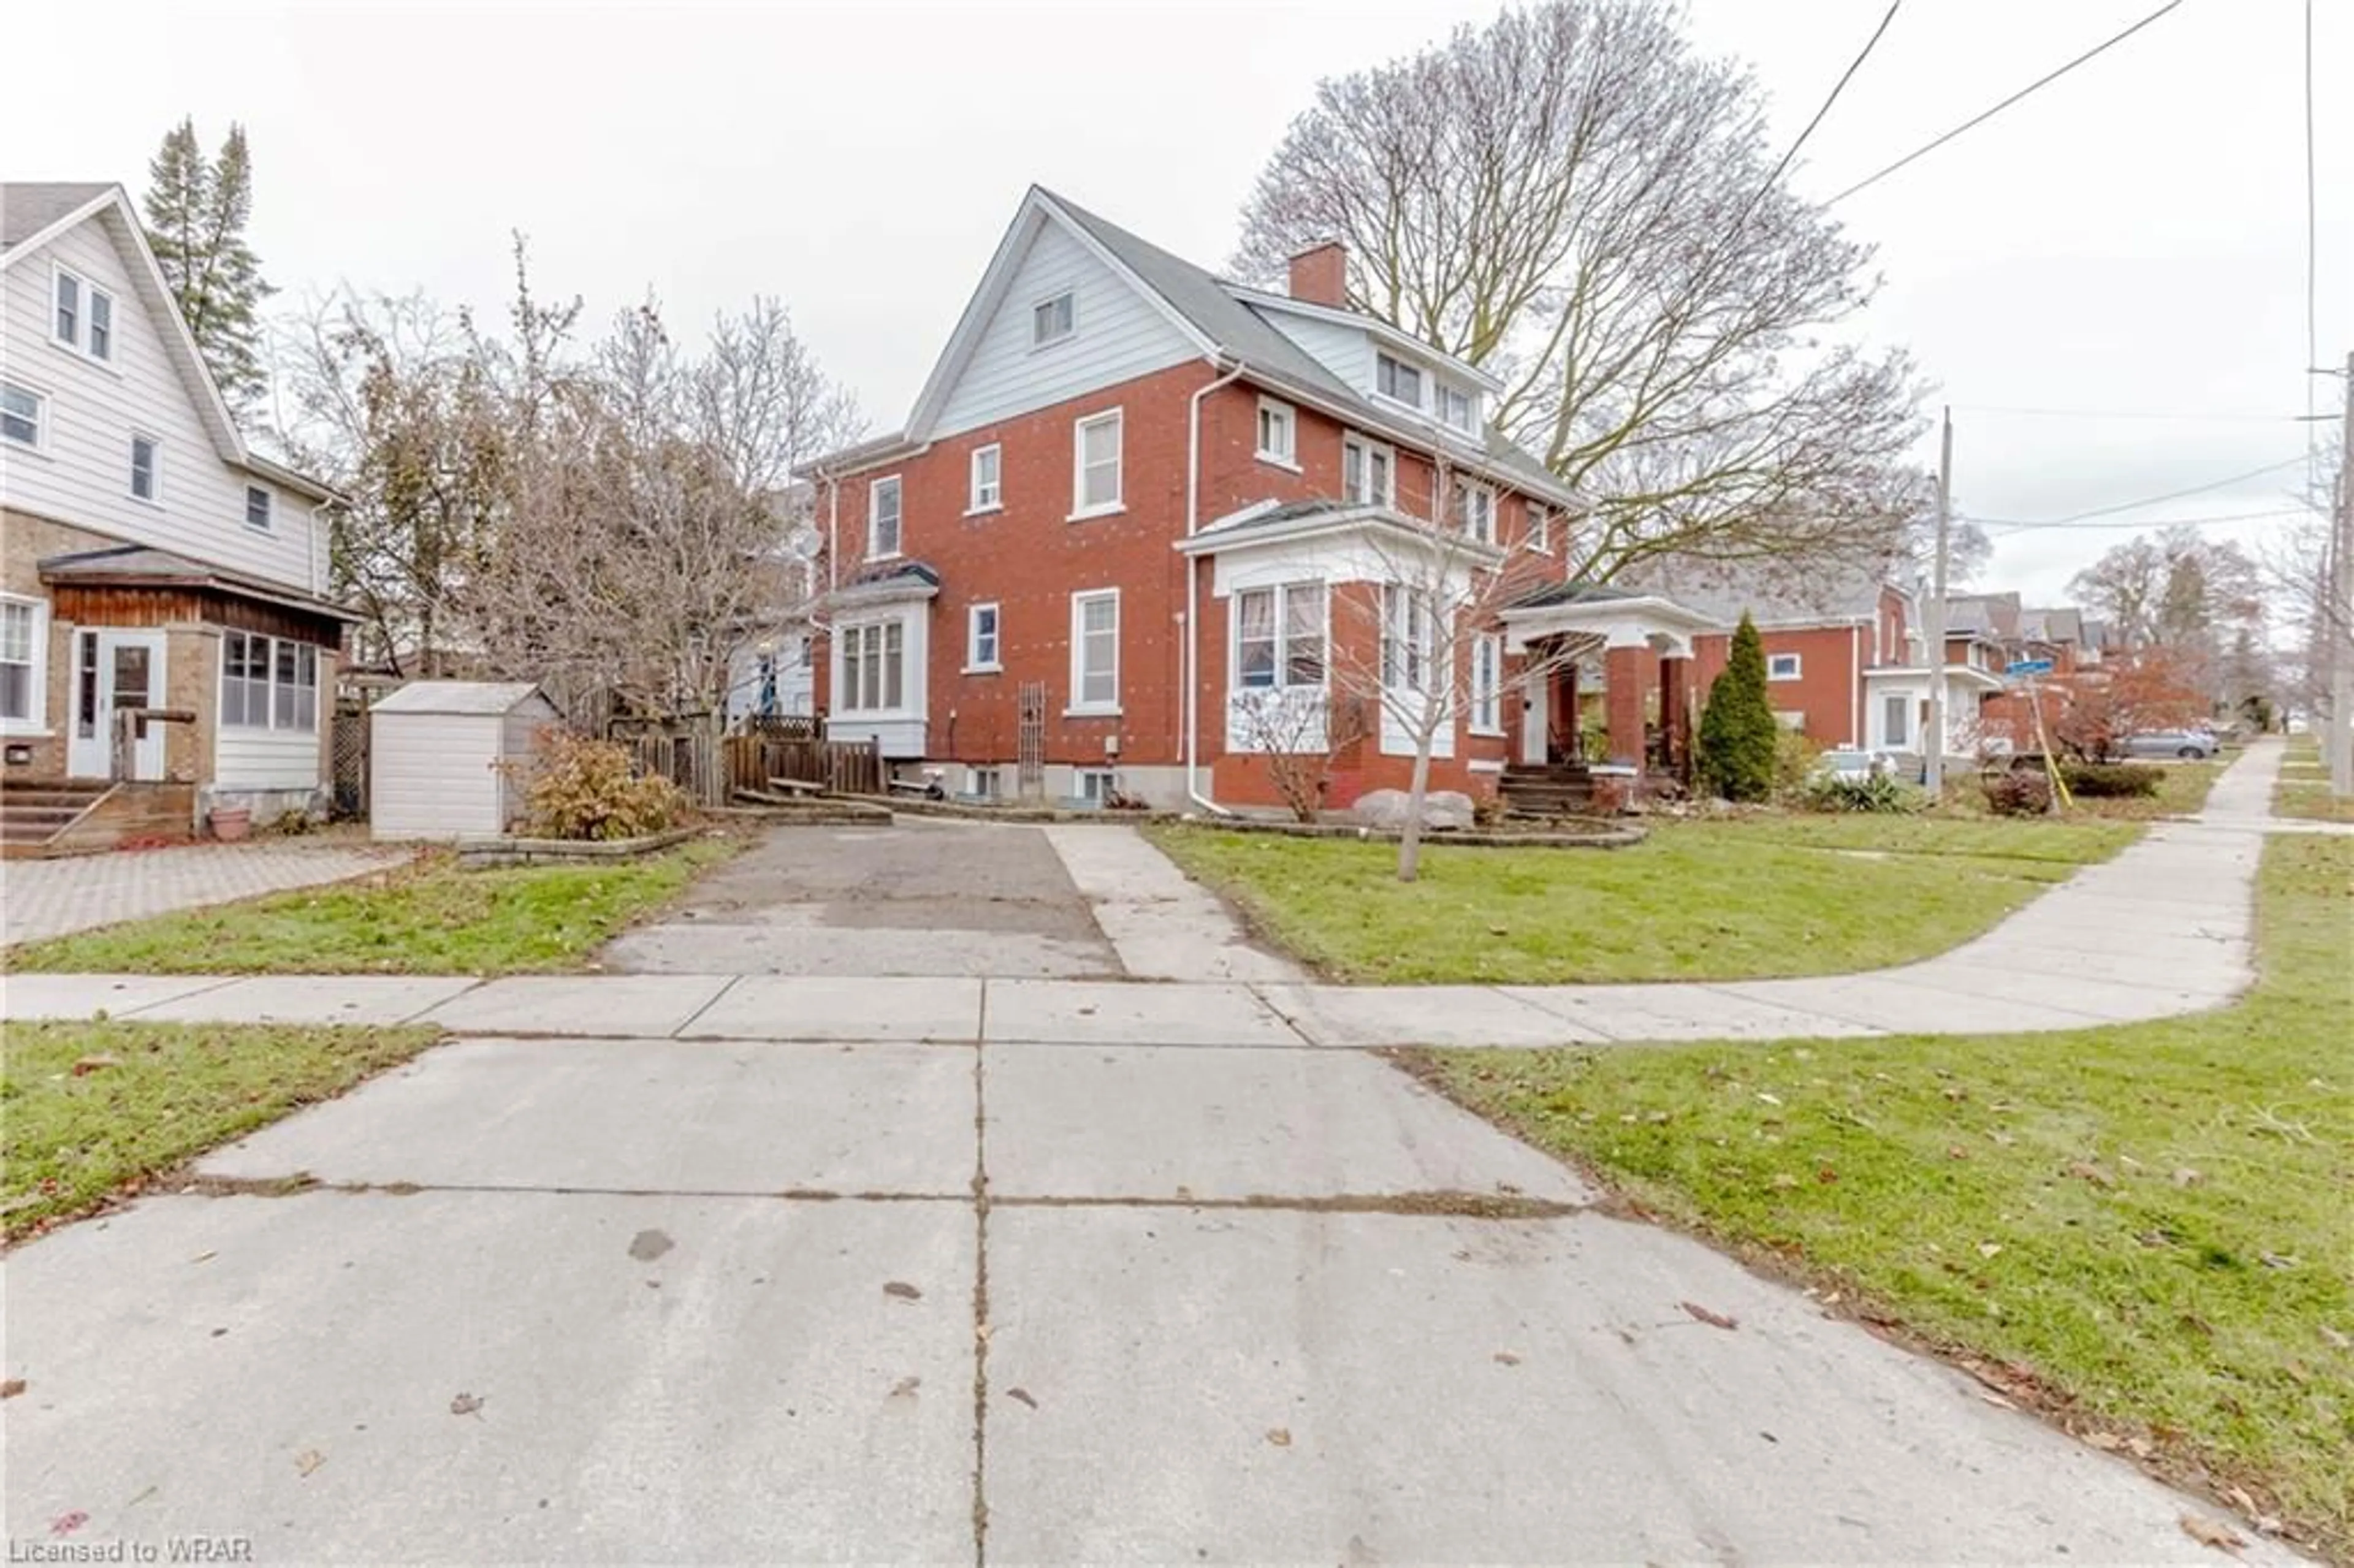 Street view for 66 Agnes St, Kitchener Ontario N2G 2G1